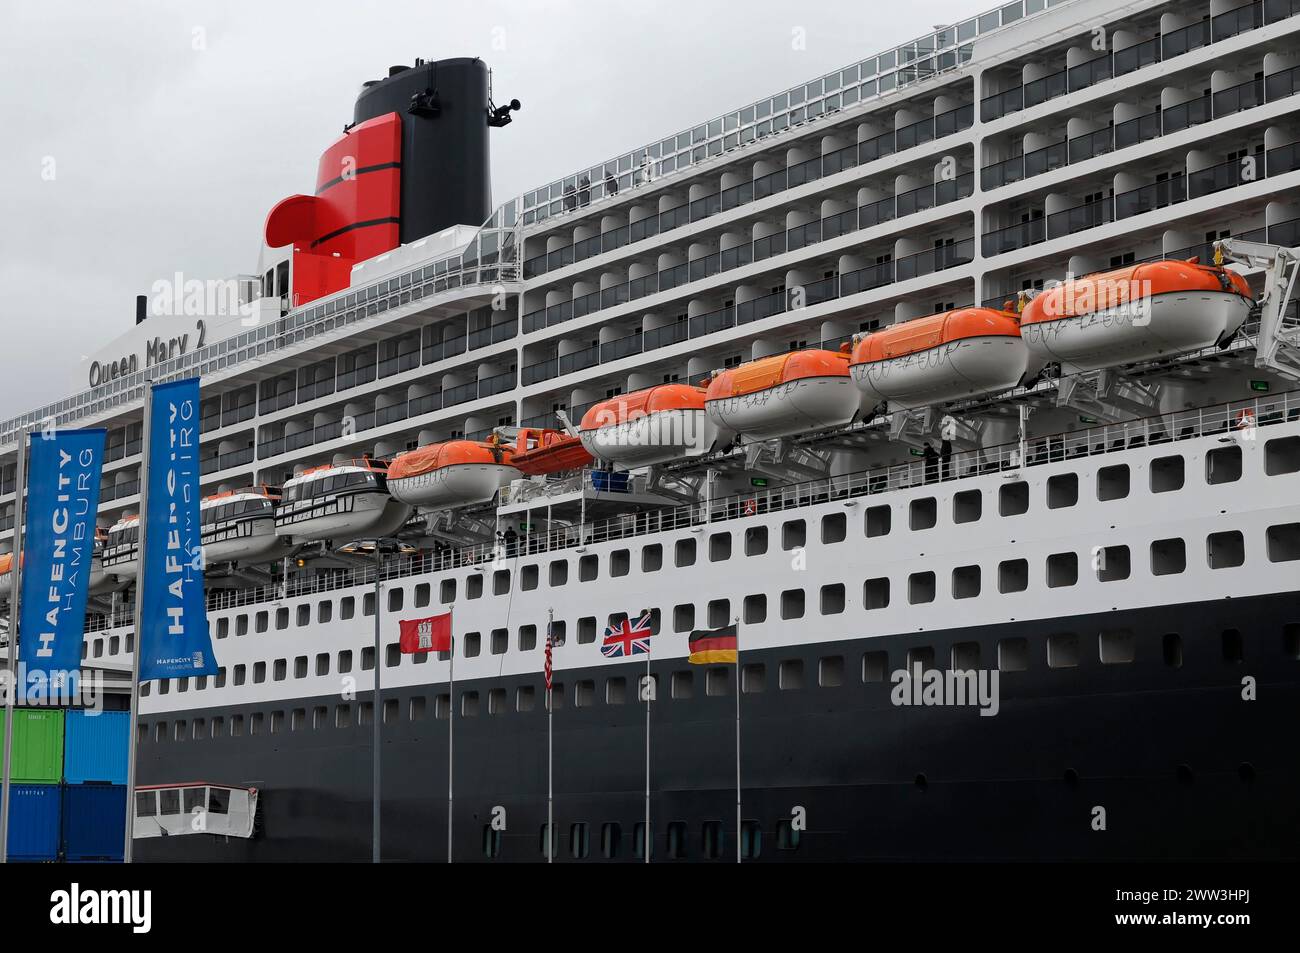 The Queen Mary 2 in the harbour with lifeboats and advertising banners, Hamburg, Hanseatic City of Hamburg, Germany Stock Photo